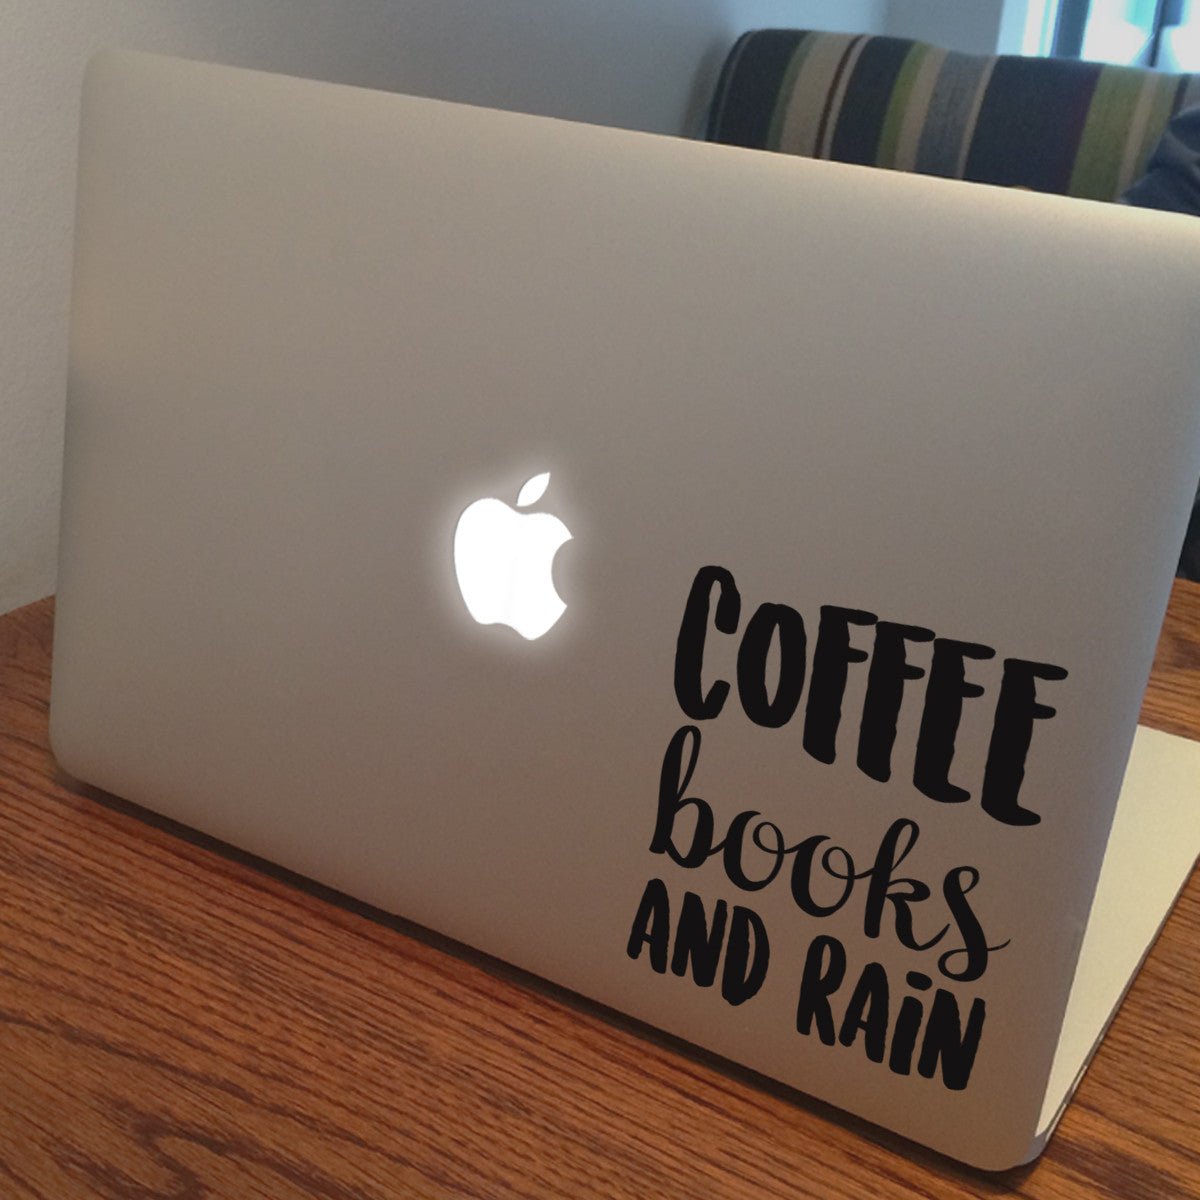 Coffee Books and Rain Quote Macbook Decal